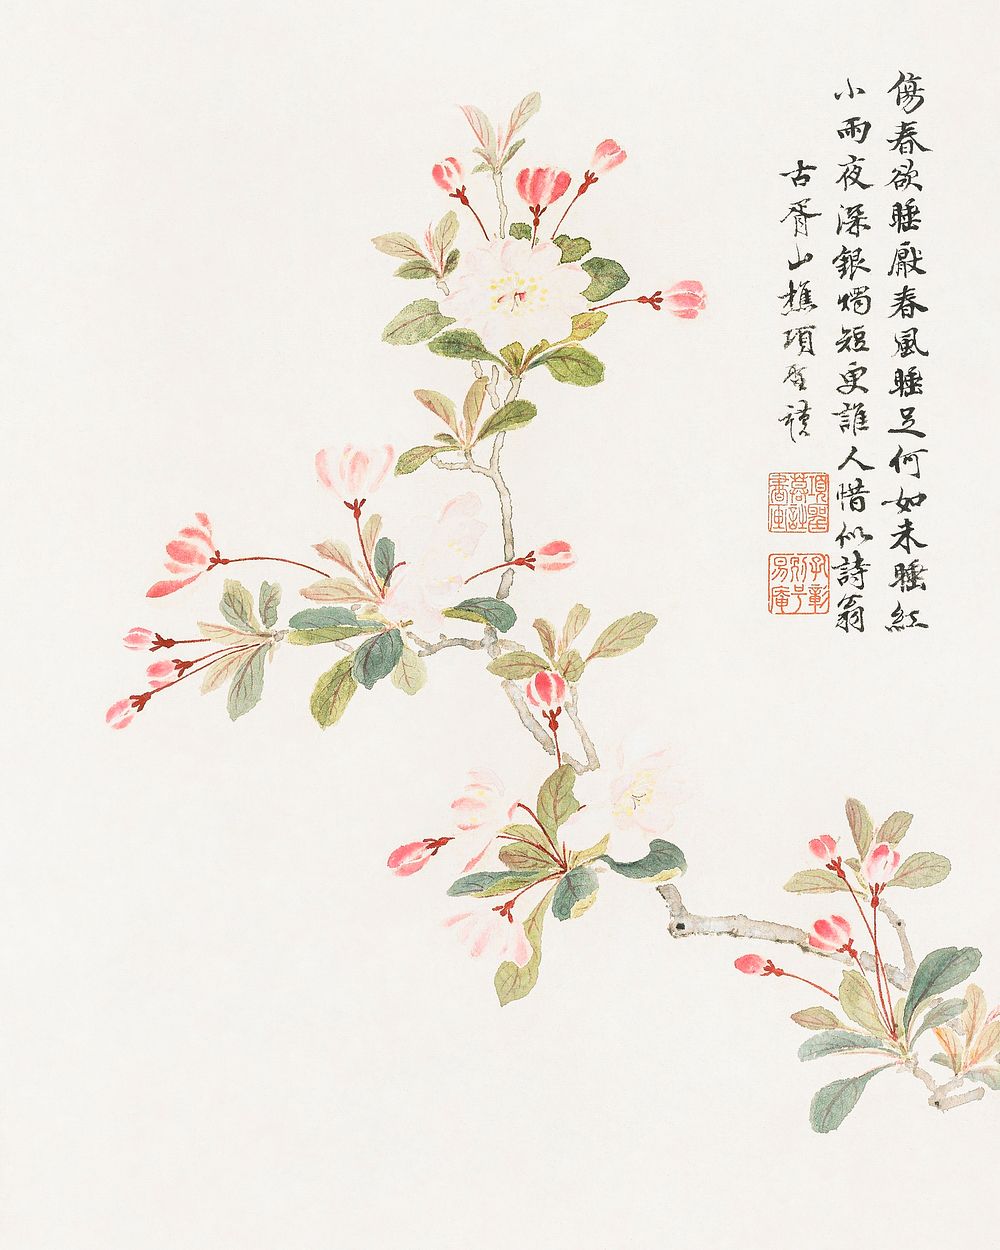 Crab-apple blossom (1656) vintage Chinese painting by Xiang Shengmo. Original public domain image from the Minneapolis…